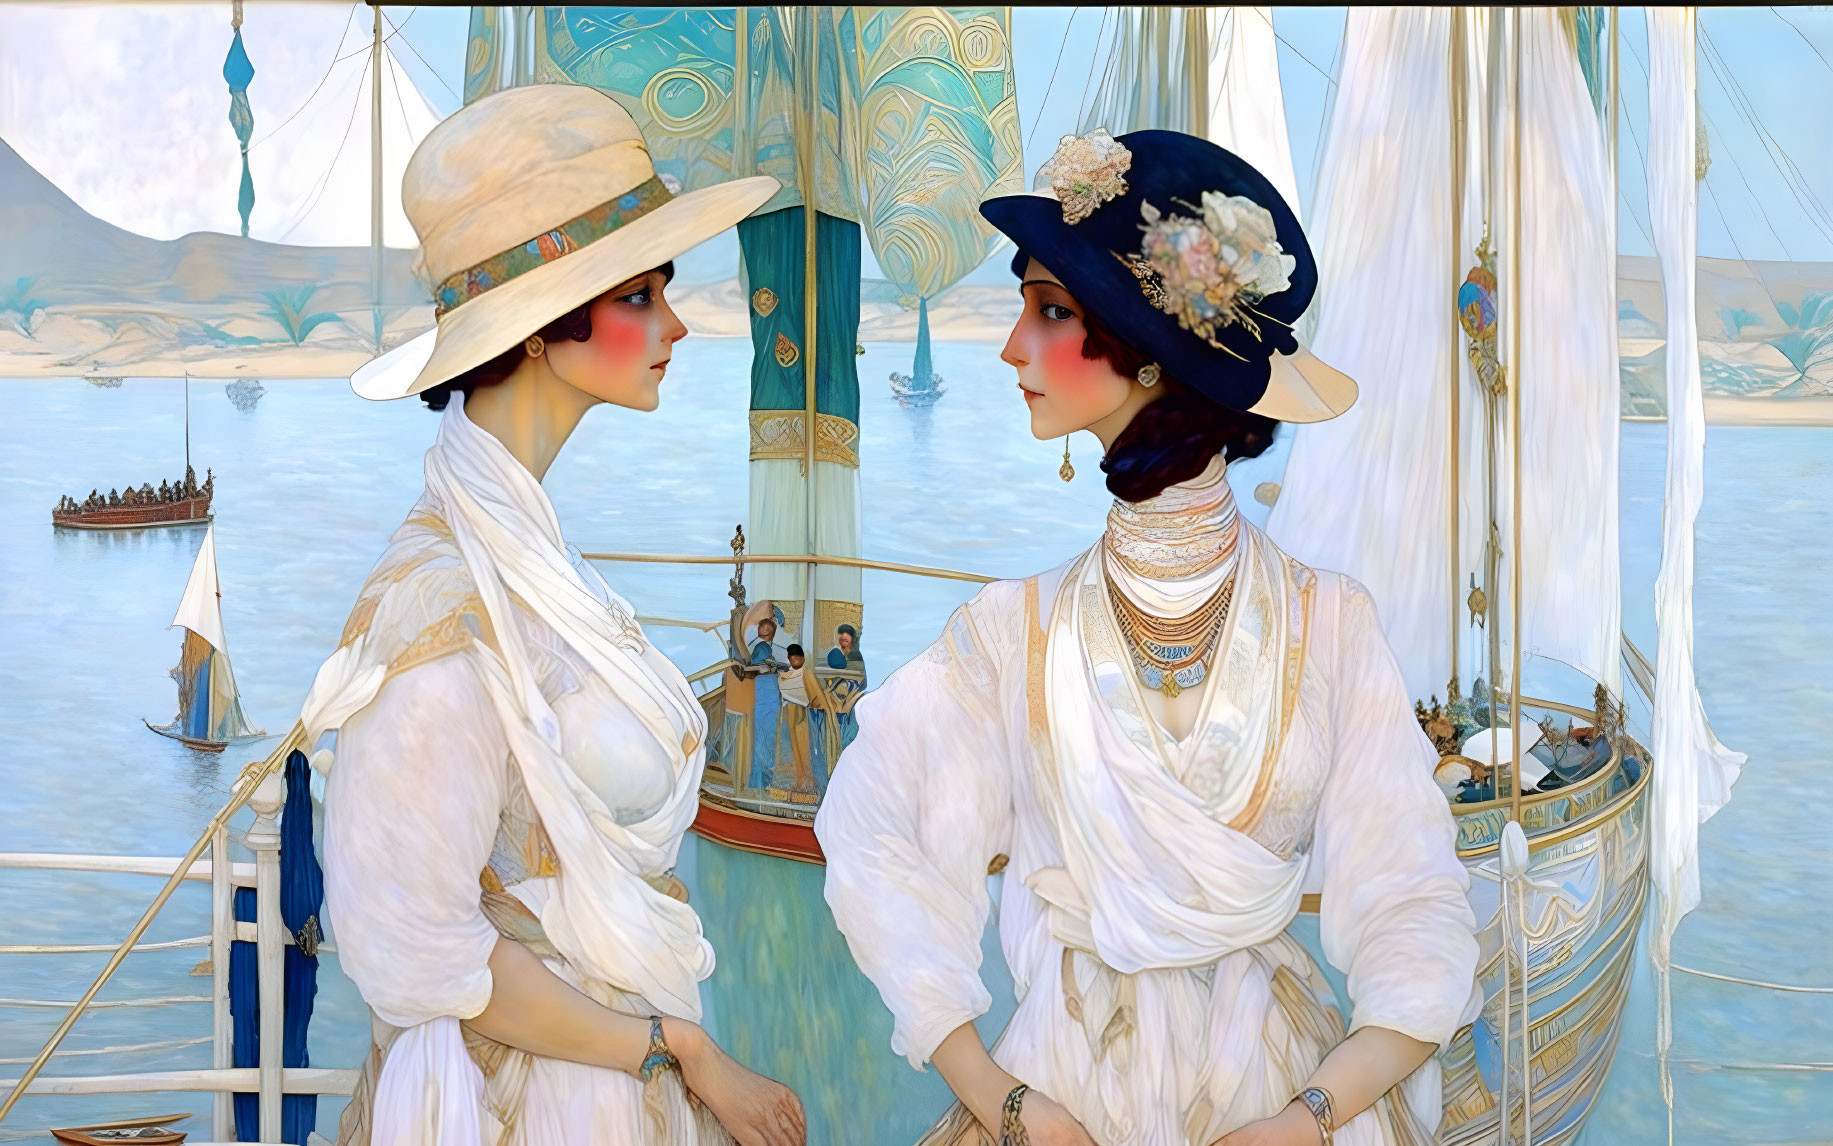 Elegantly dressed women with wide-brimmed hats by serene sailboats